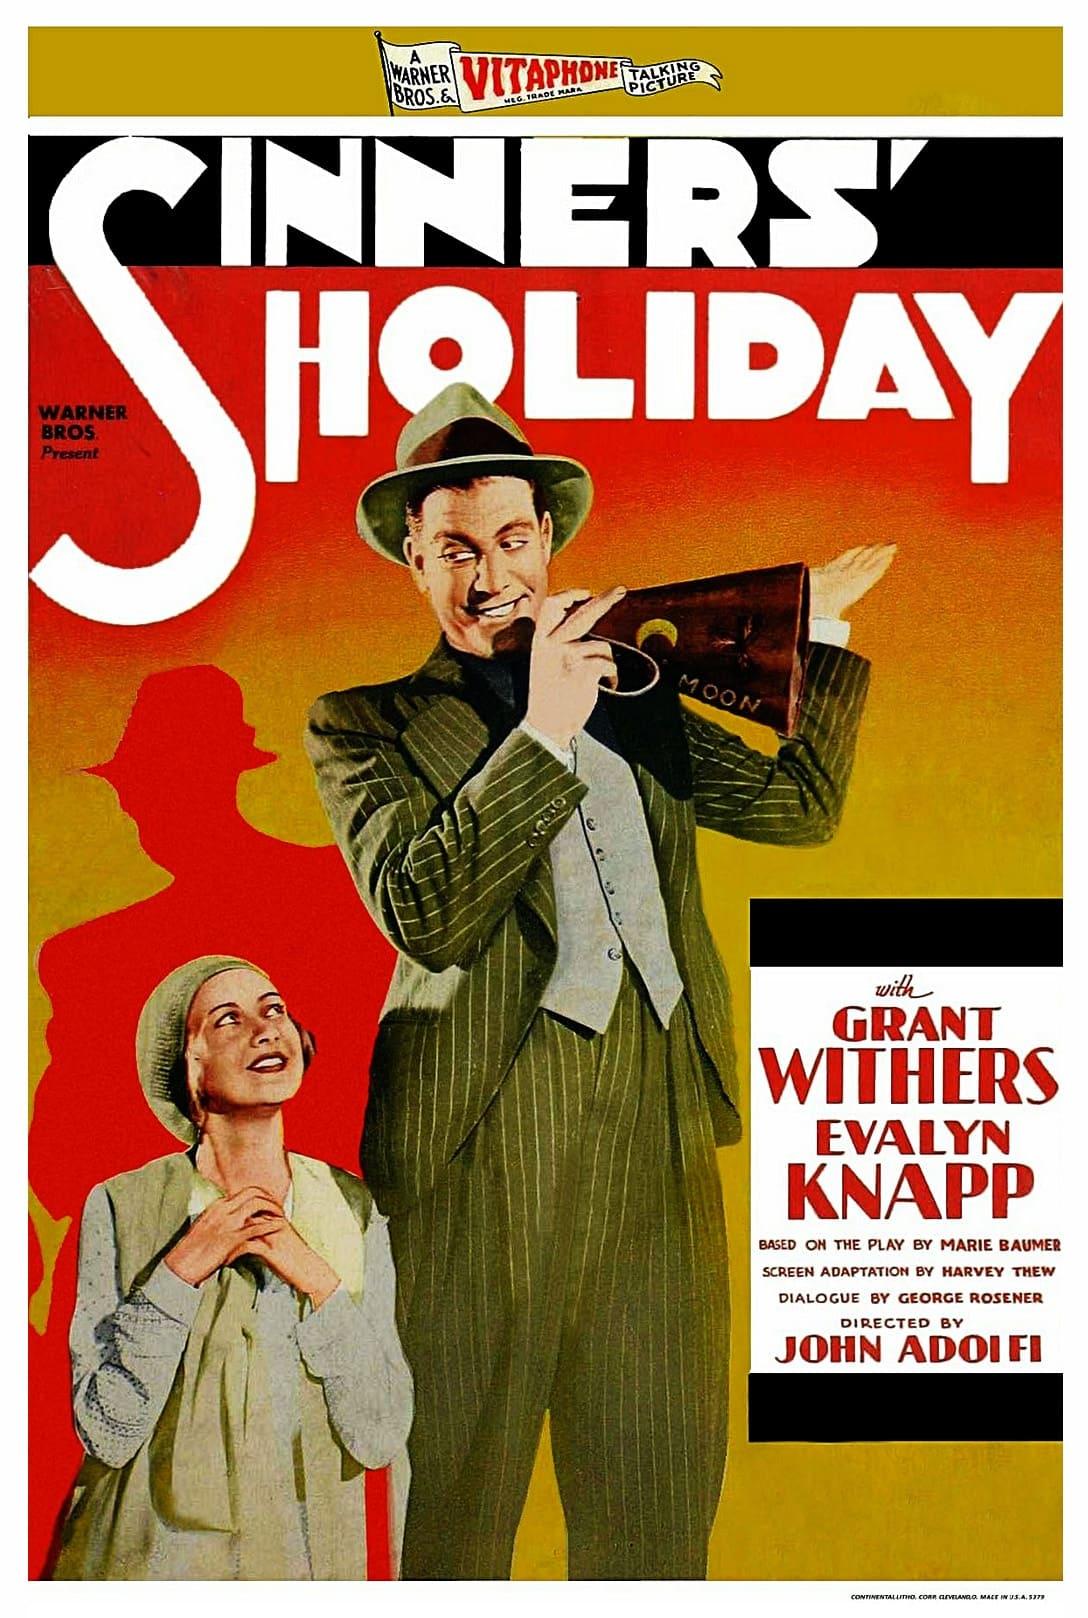 Sinners' Holiday poster